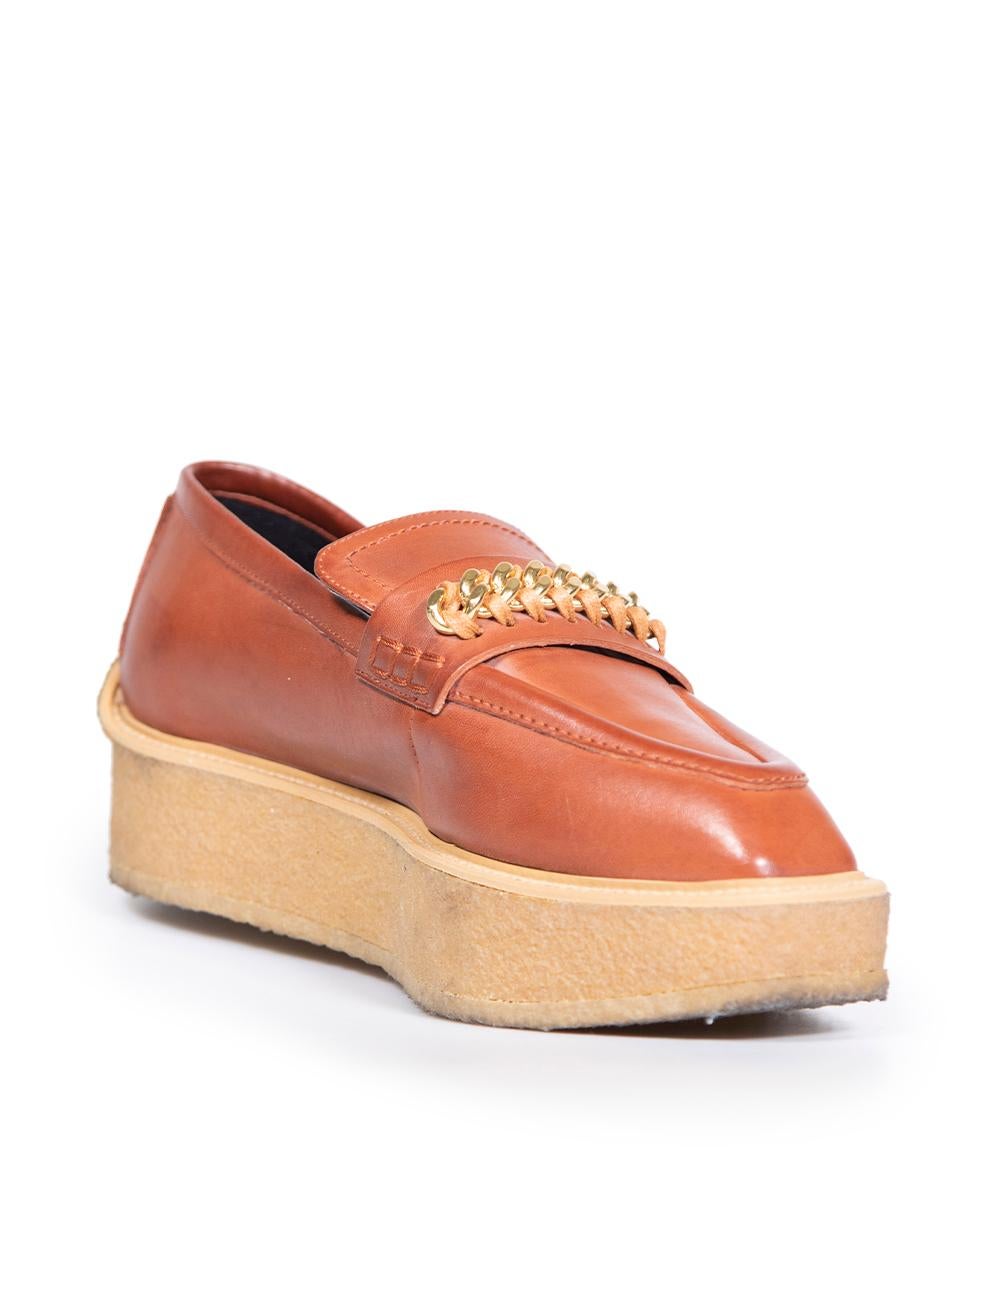 CONDITION is Very good. Minimal wear to loafers is evident. Minimal wear to uppers with some light scuffing throughout. Mild discolouration can be seen through the mid and outsoles on this used Stella McCartney designer resale item.
 
 Details
